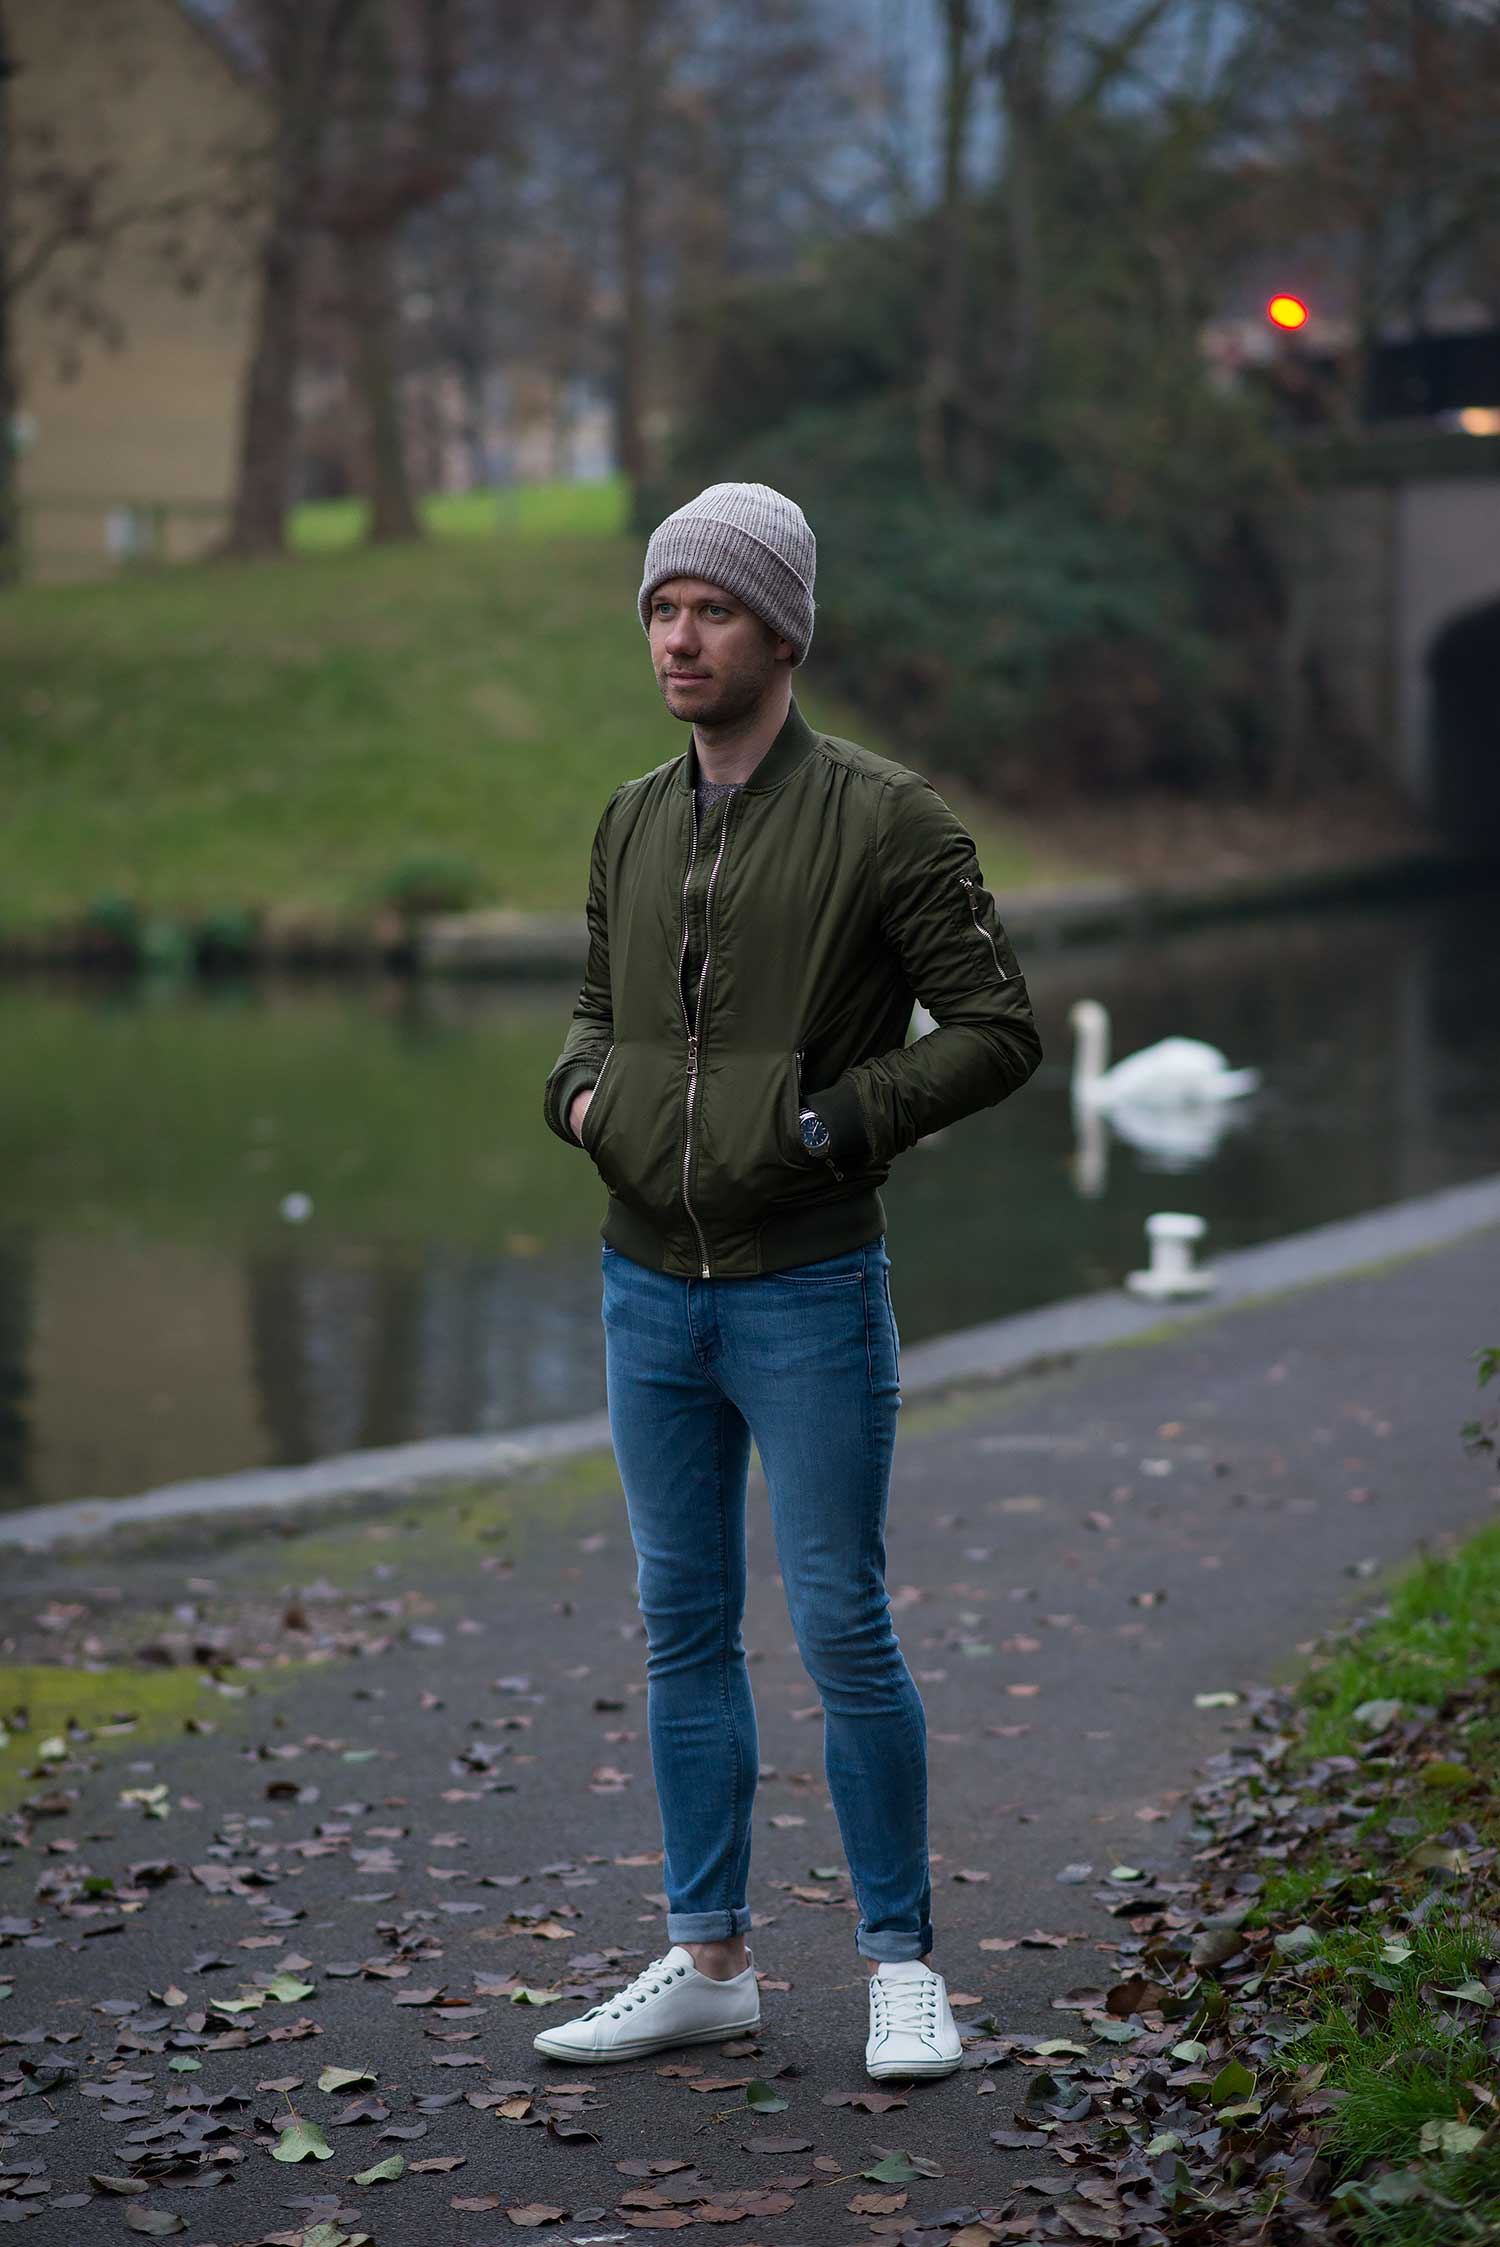 Khaki Bomber Jacket And Skinny Jeans Outfit | Your Average Guy